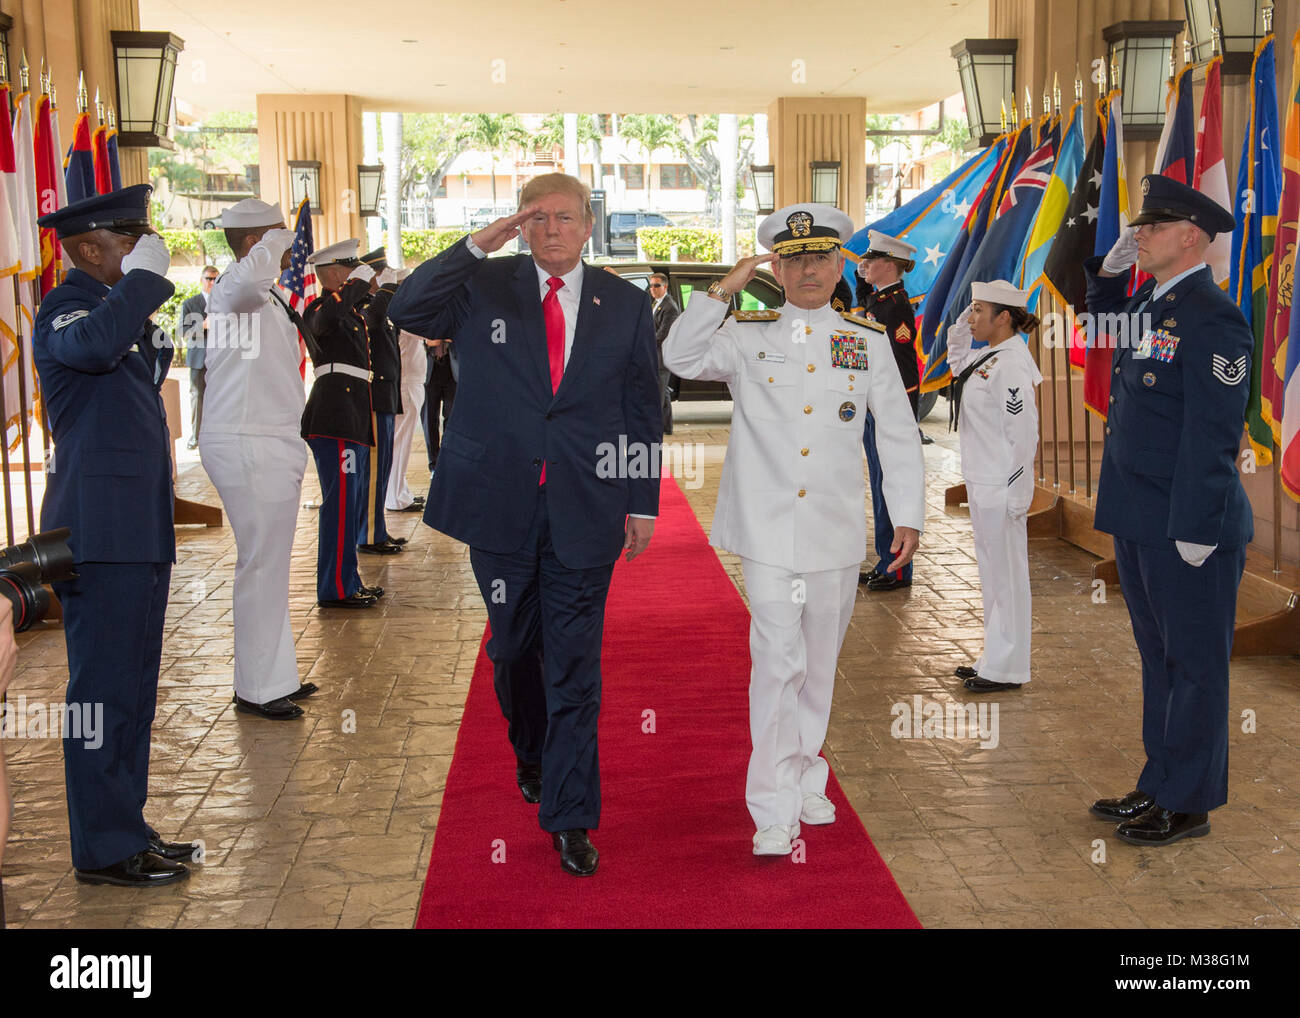 171103-N-WY954-037 CAMP H.M. SMITH (Nov. 3, 2017)— President Donald J. Trump and U.S. Pacific Command (USPACOM) Commander, Adm. Harry Harris, are piped aboard during an honors ceremony at USPACOM headquarters.  The President is in Hawaii to receive a briefing from USPACOM prior to traveling to Japan, the Republic of Korea, China, Vietnam and the Philippines from November 3-14. During the trip the President will underscore his commitment to longstanding U.S. alliances and partnerships, and reaffirm U.S. leadership in promoting a free and open Indo-Asia-Pacific region. The president’s engagement Stock Photo